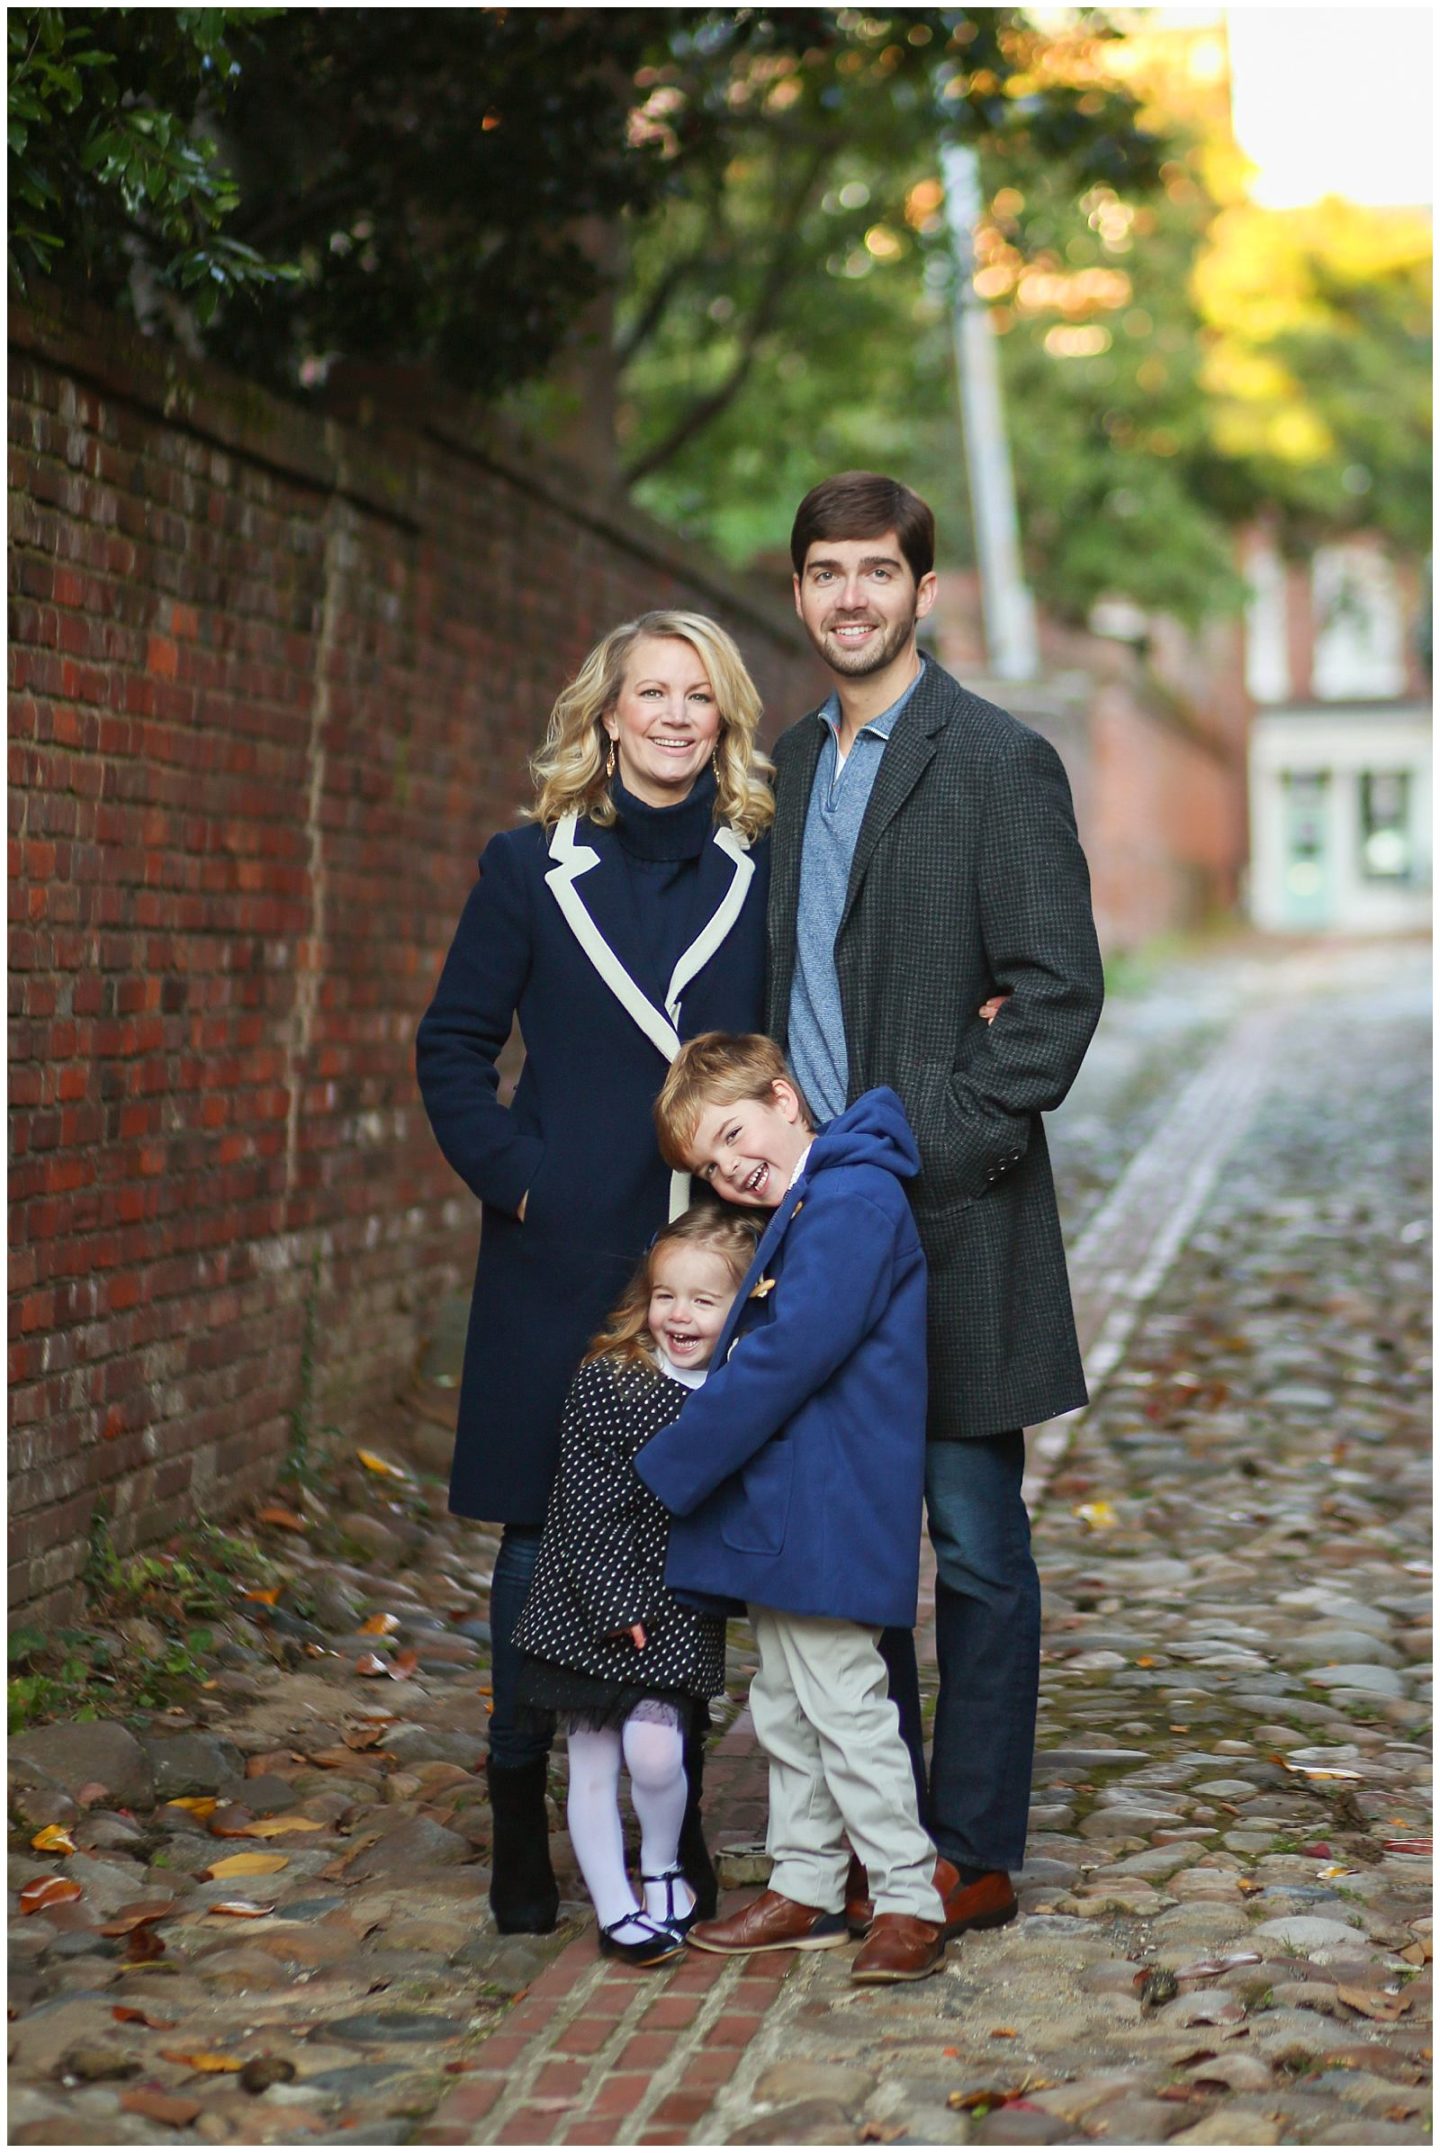 Alexandria VA Family photographer photographs on Wales Alley in Old Town